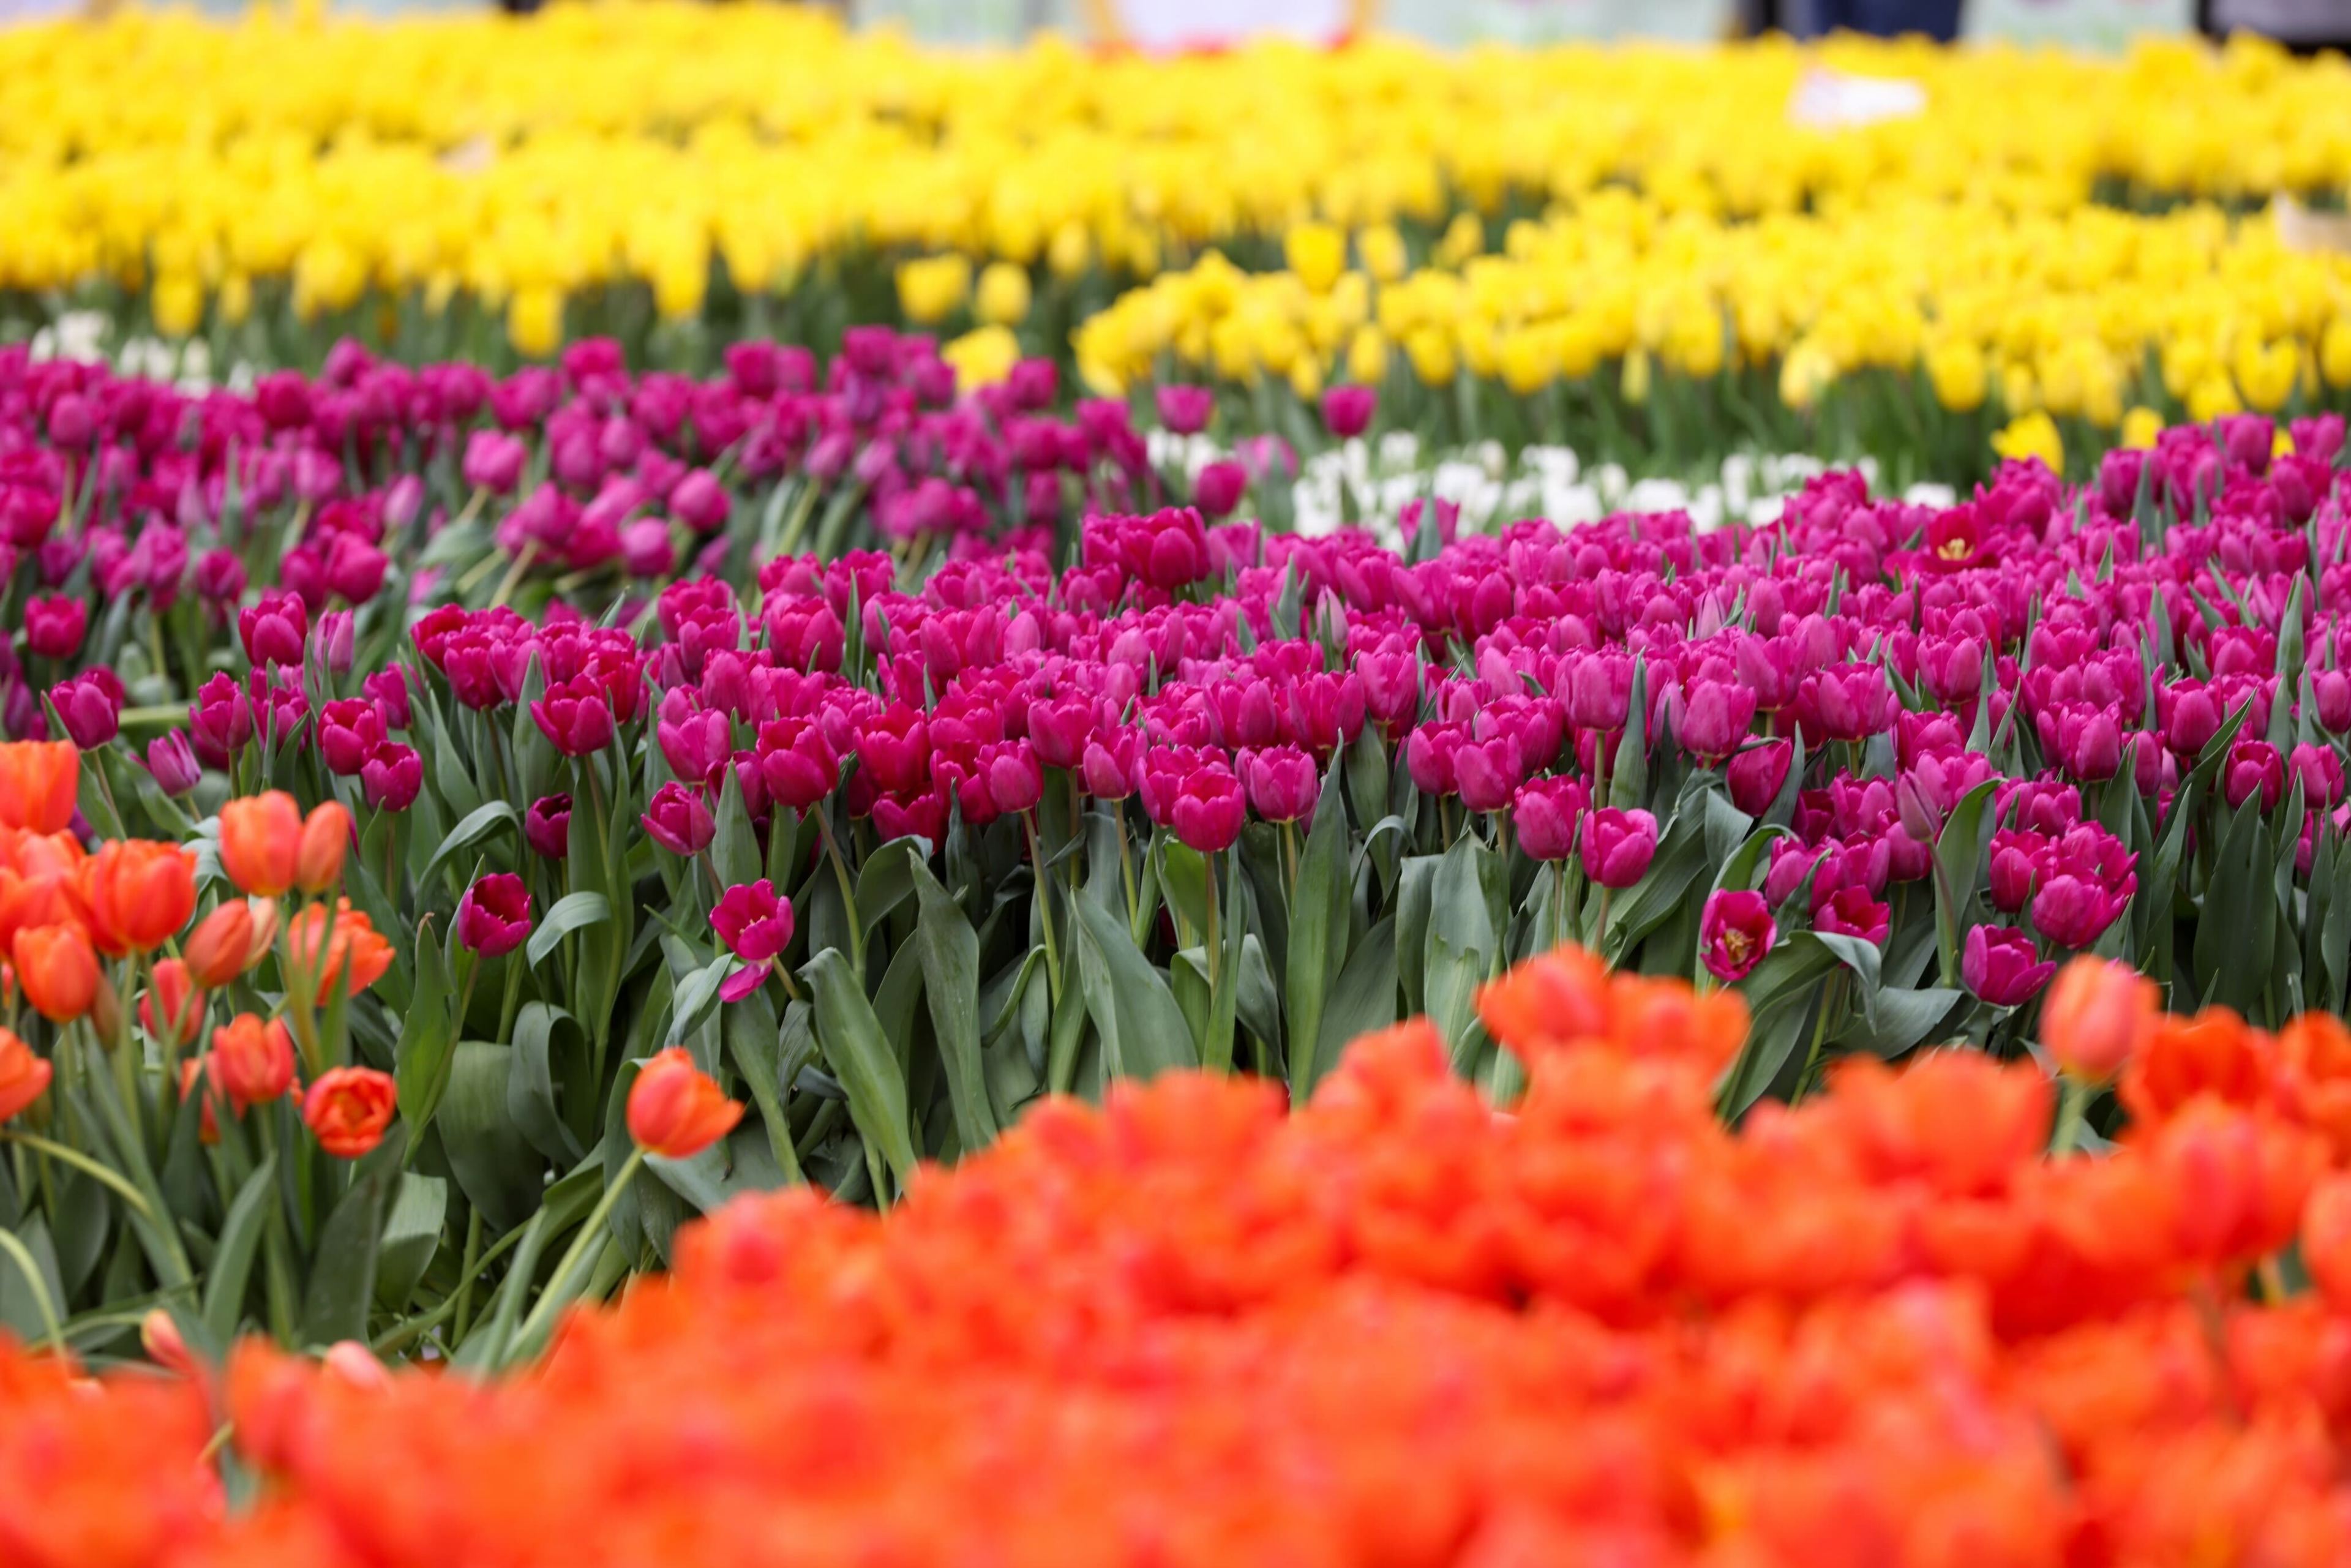 Rows of colorful tulips in purple, yellow, and orange, with a soft focus background.